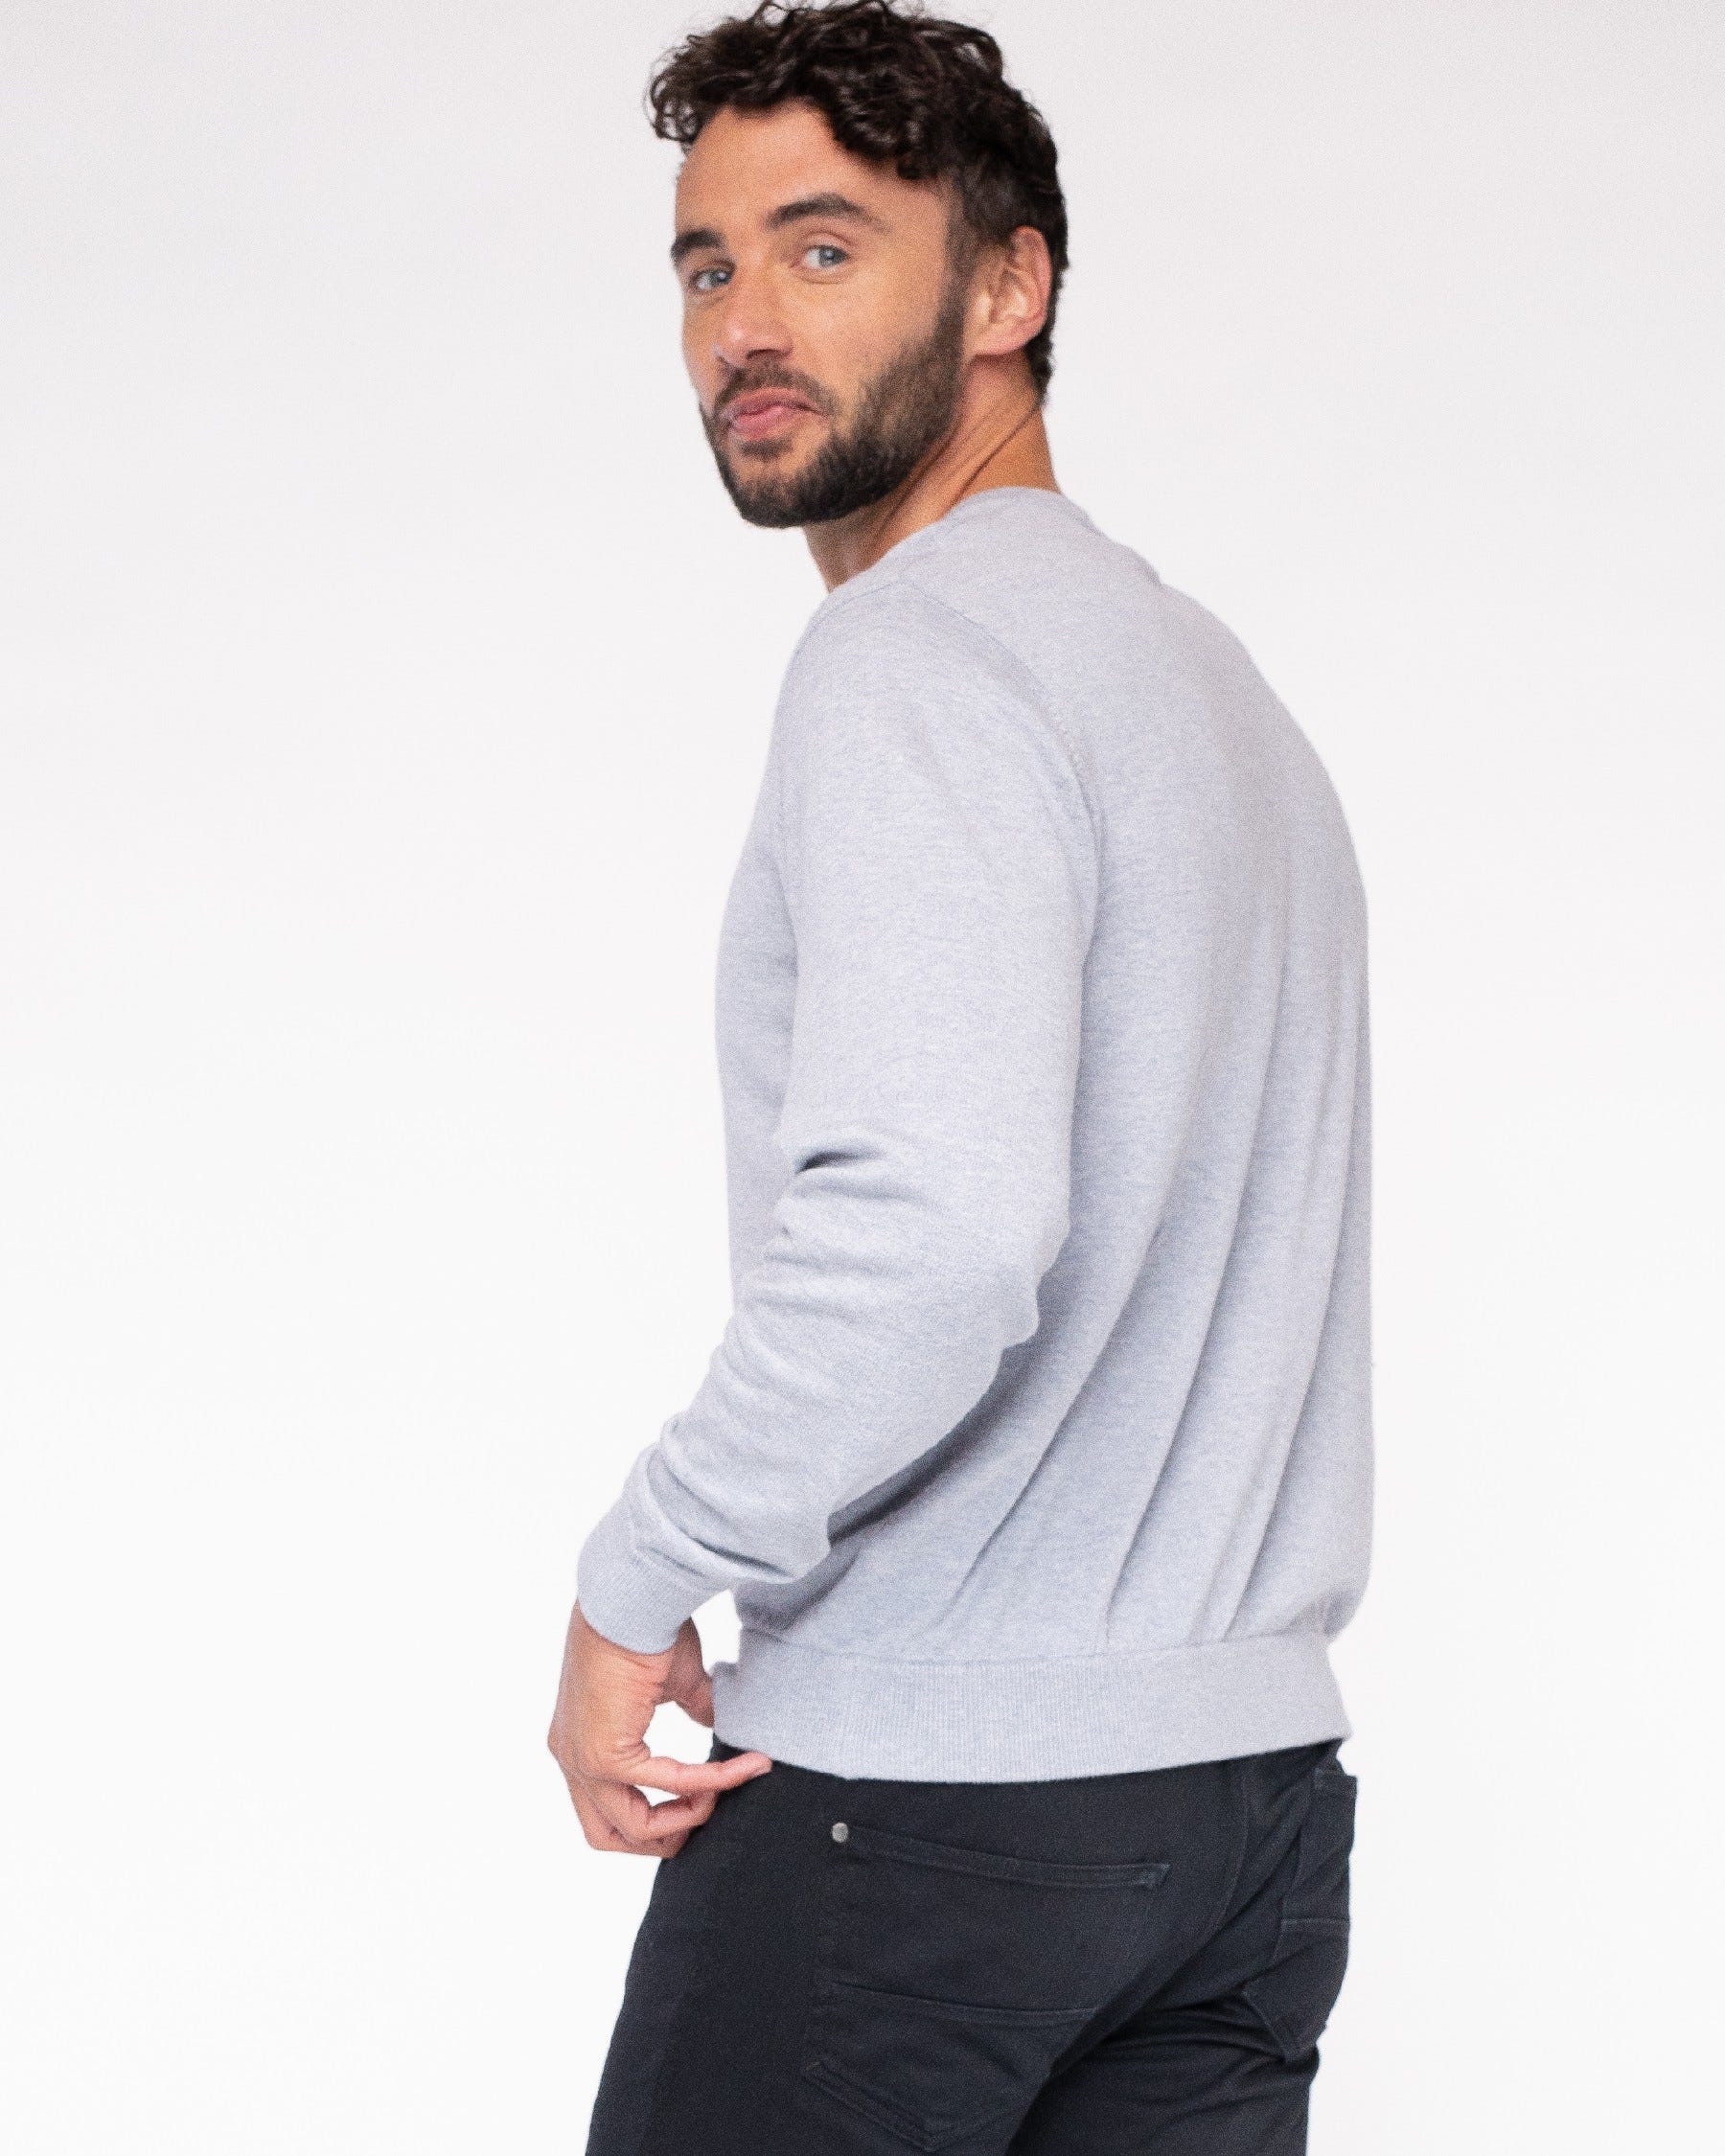 Cotton Cashmere Classic V-Neck Sweater (Choice of Colors) by Alashan Cashmere